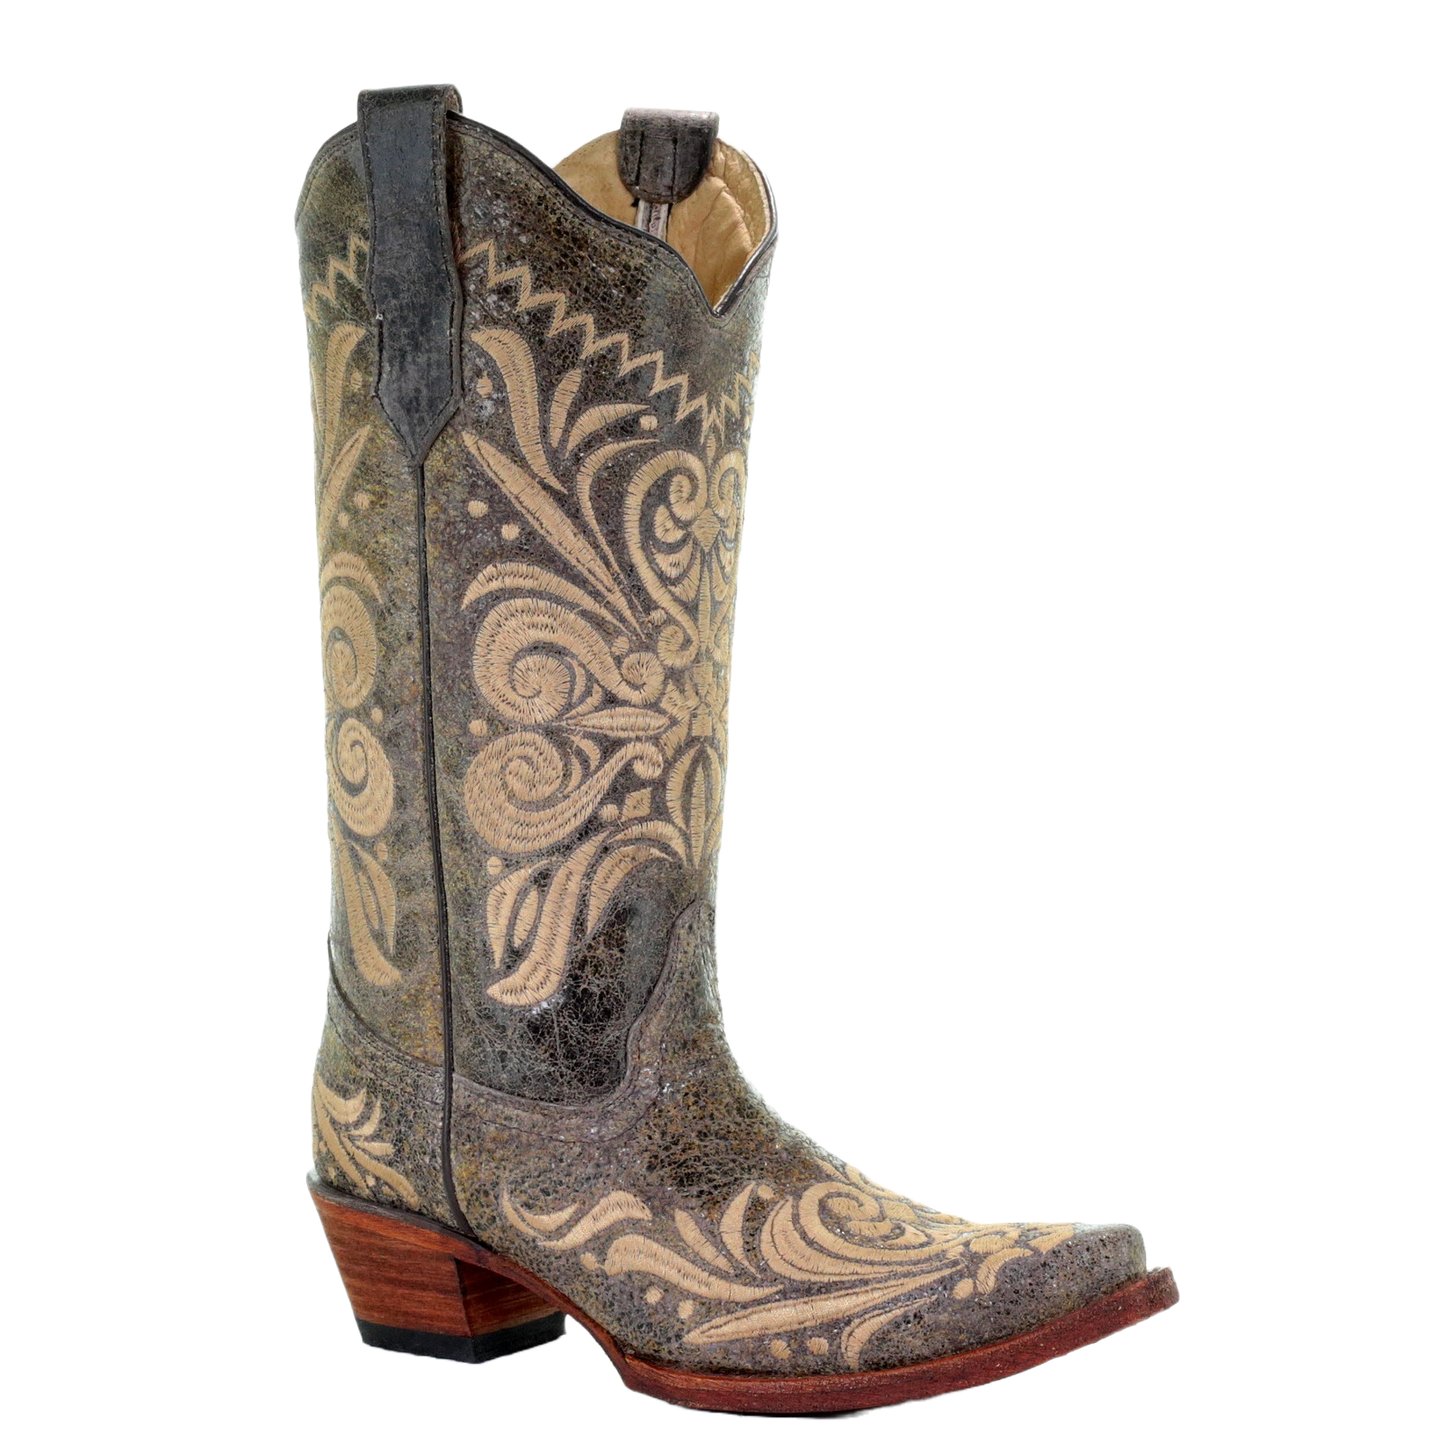 Circle G by Corral Ladies Distressed Green/Beige Filigree Boots L5407